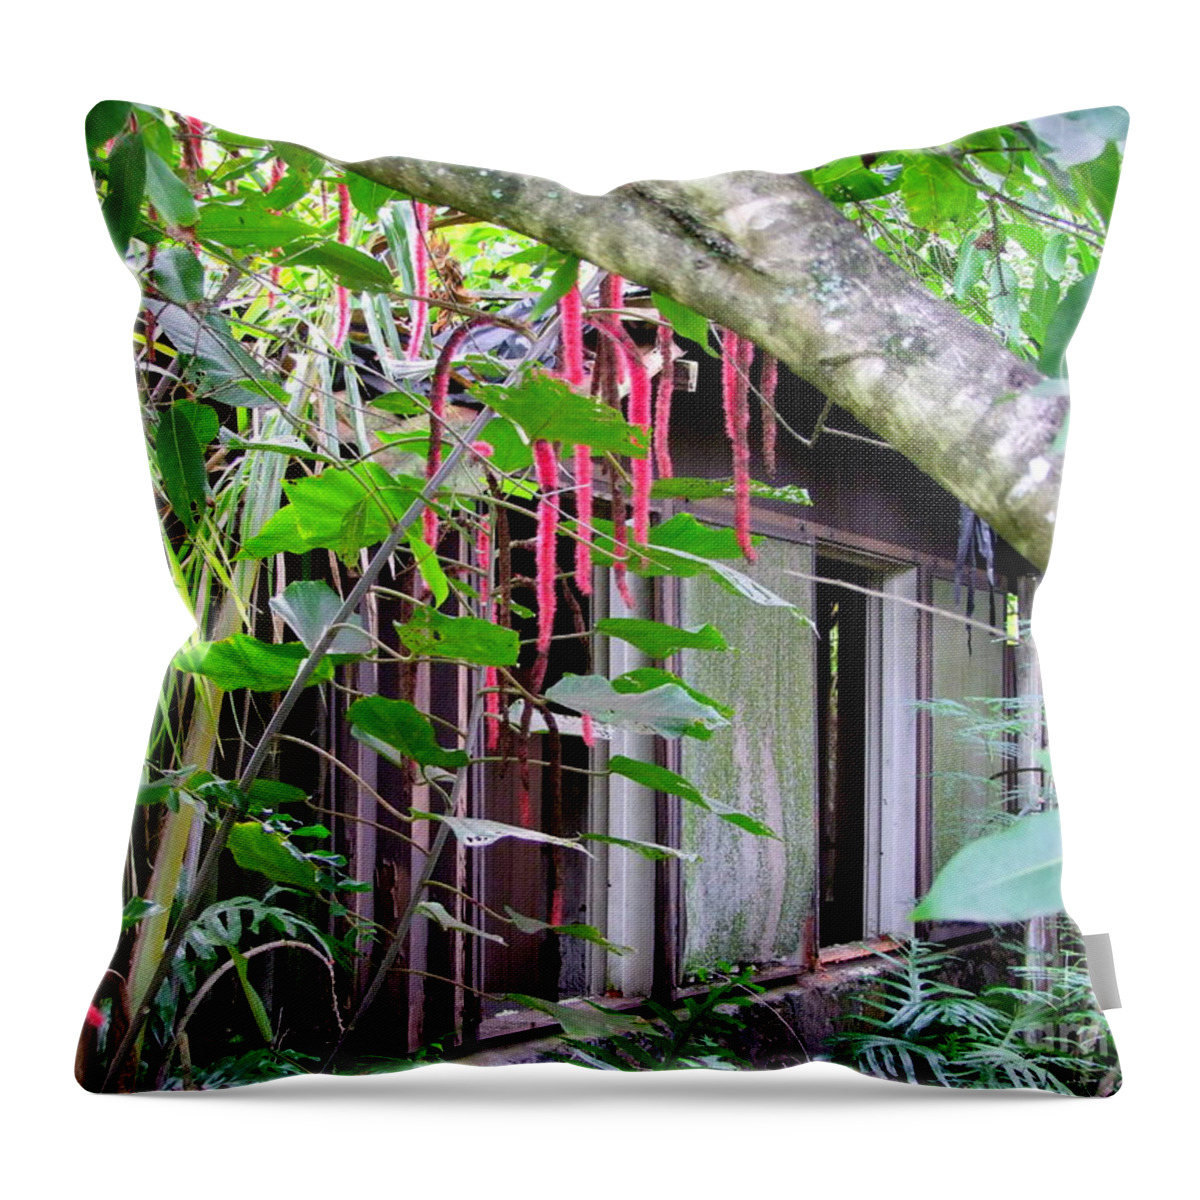 Elvis Presley Throw Pillow featuring the photograph Elvis Presley - Bungalow 56 - Coco Palms Hotel by Mary Deal